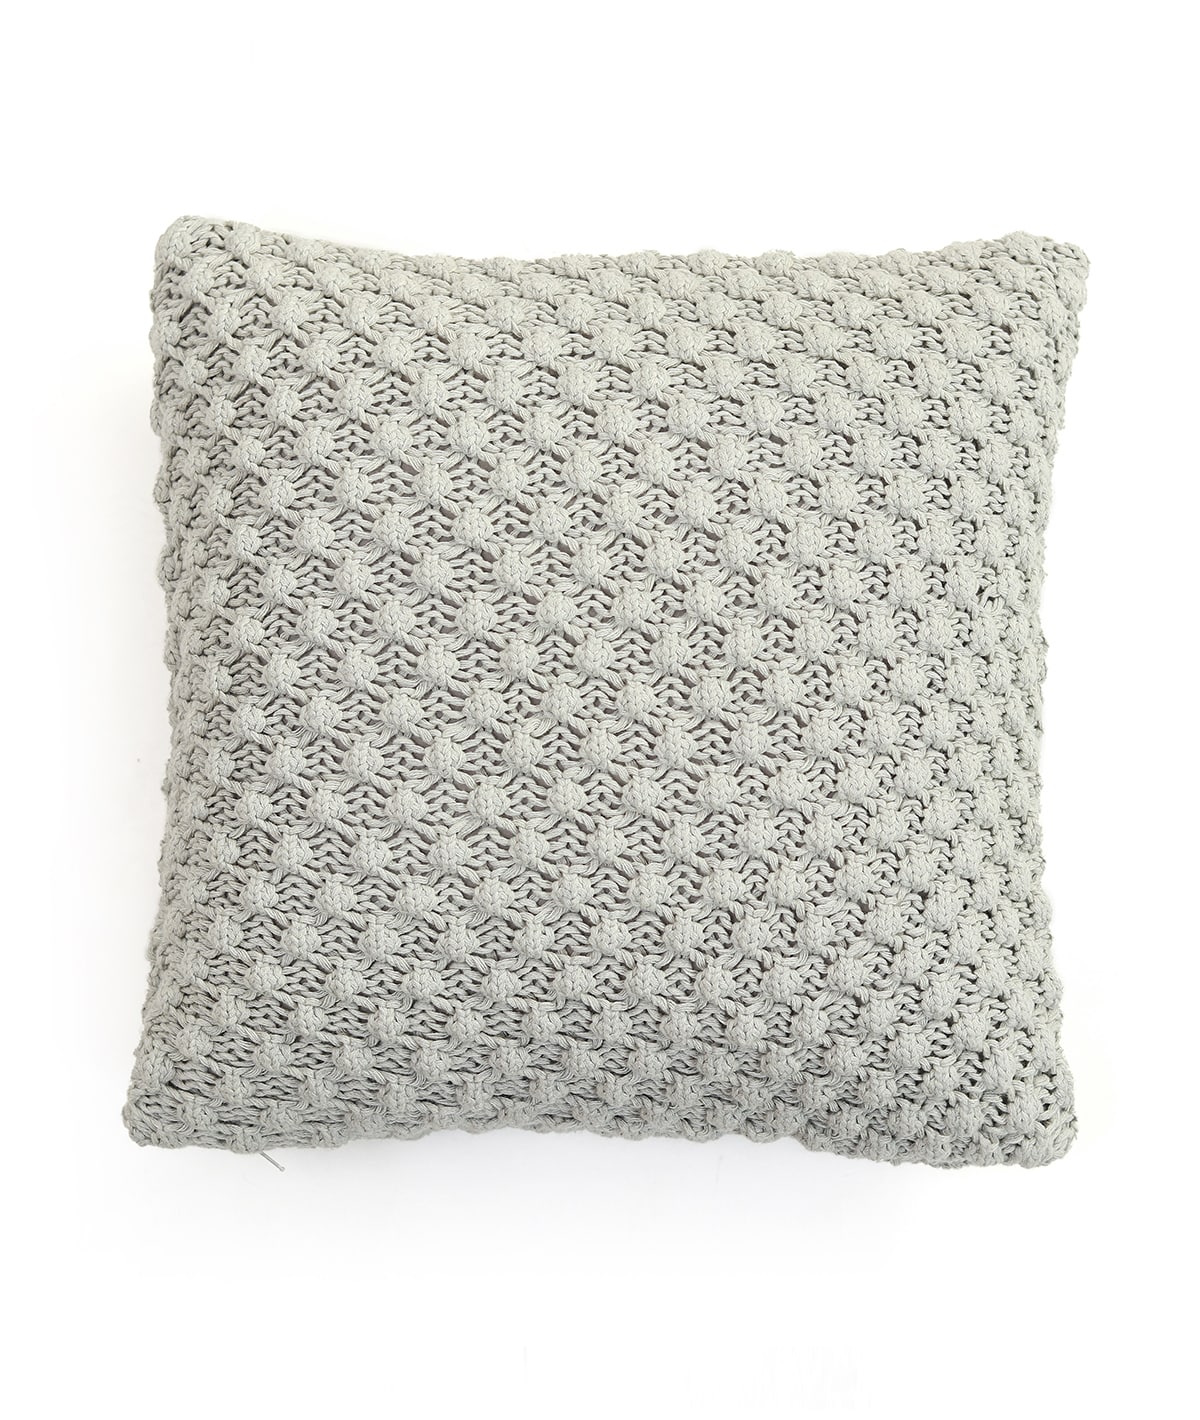 Popcorn Knit Vanilla Grey Melange Pink Cotton Knitted Decorative 16 X 16 Inches Cushion Cover